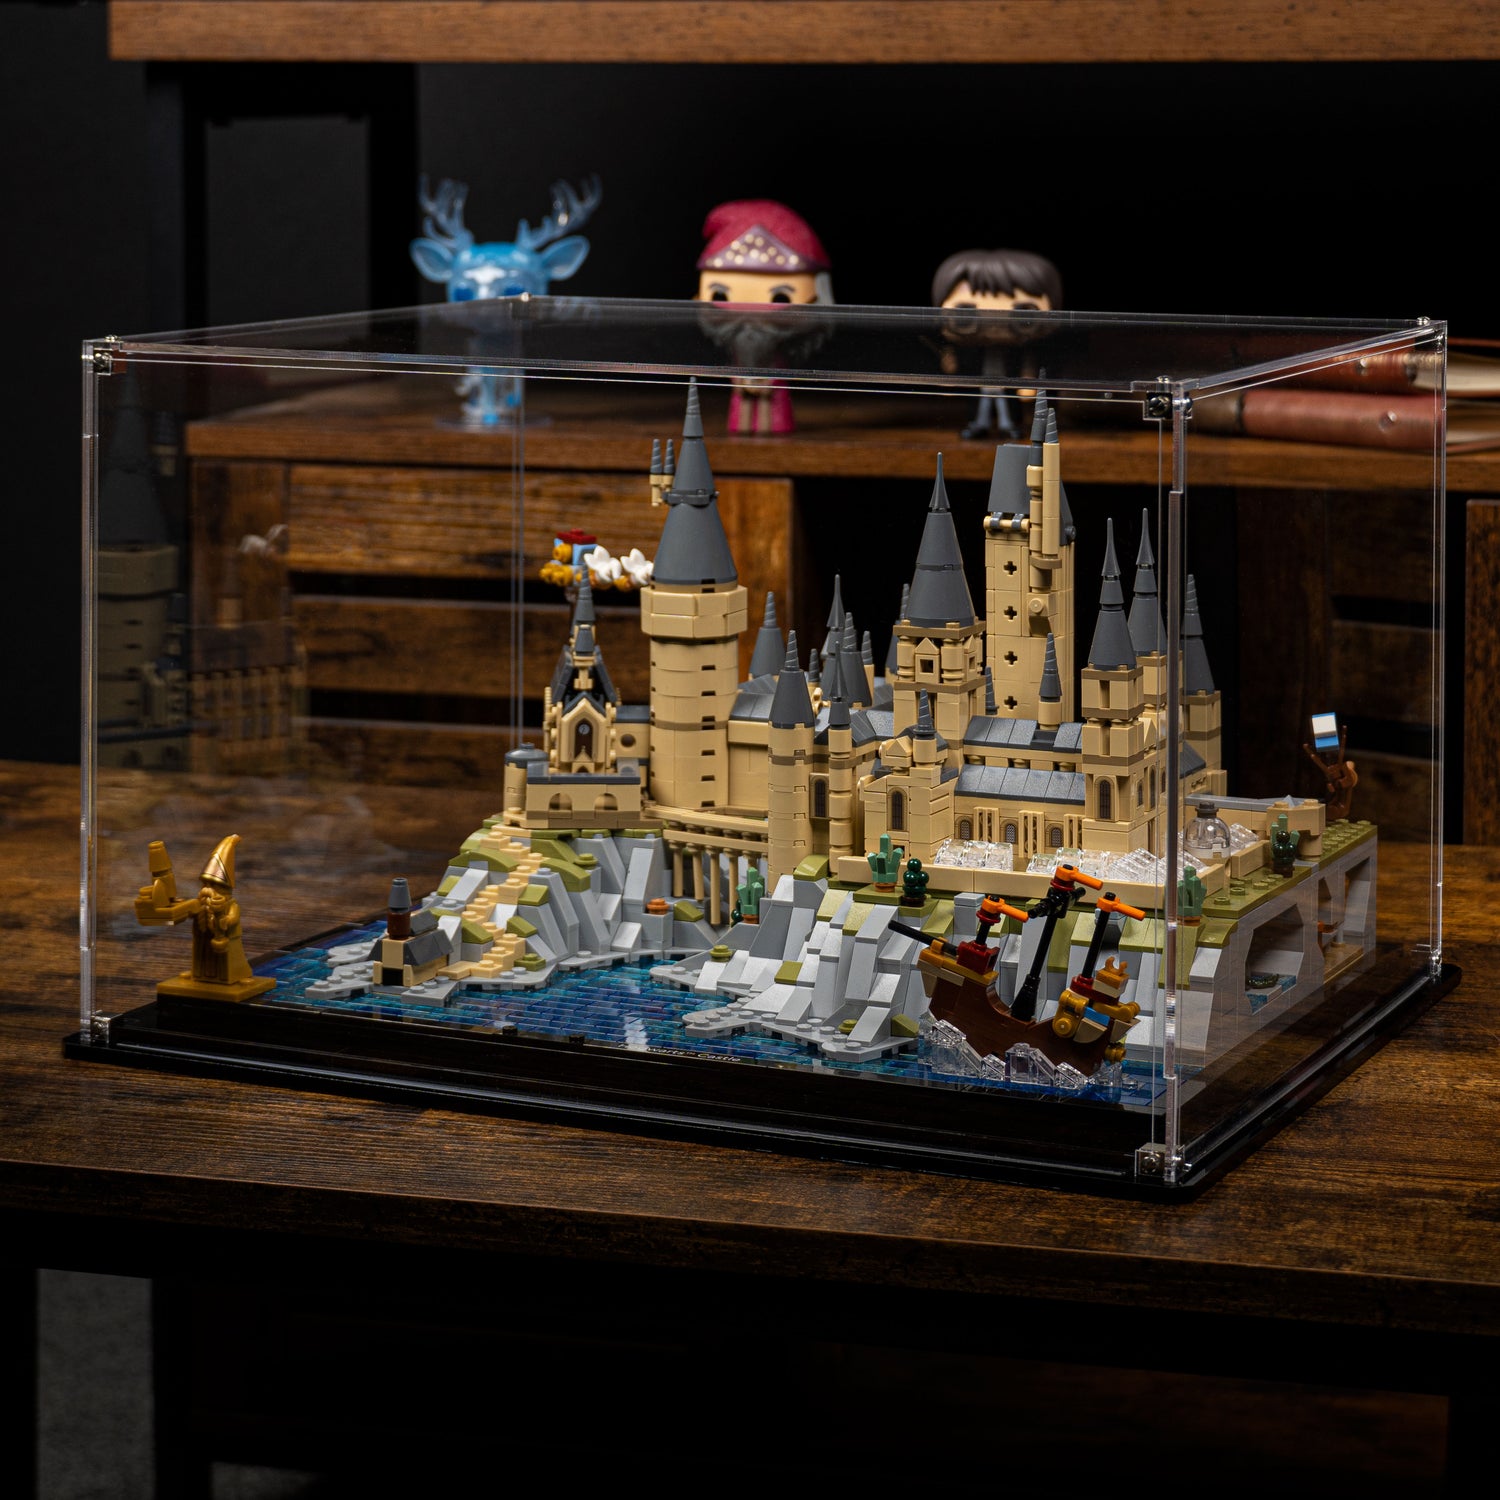 Protect the castle with shields of crystal clear Acrylic.